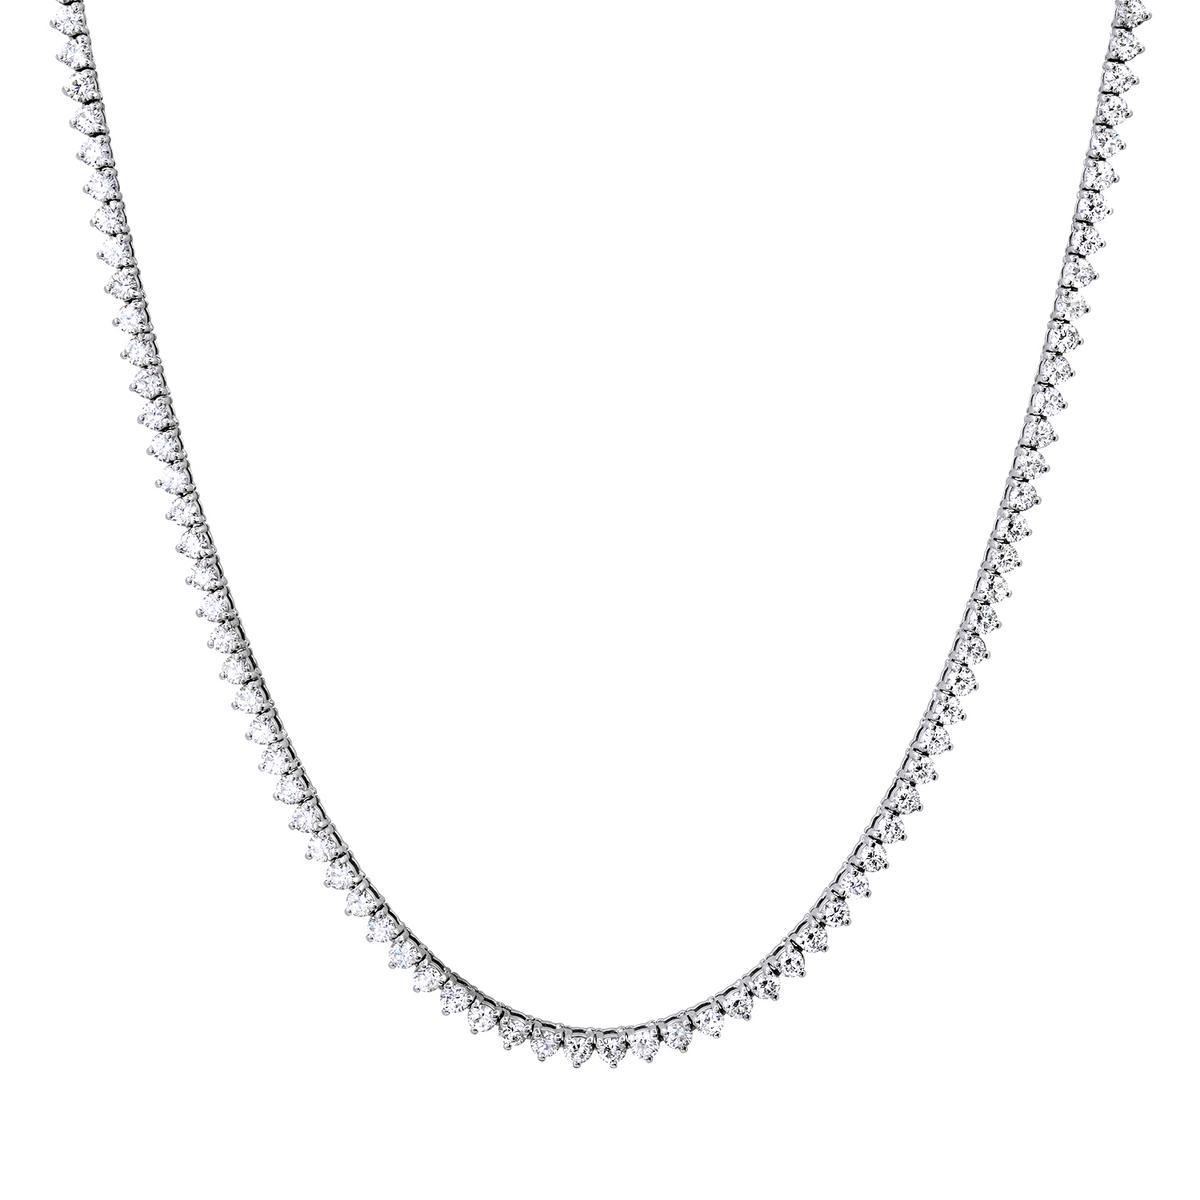 14K White Gold Setting with 7.98ct Diamond Necklace